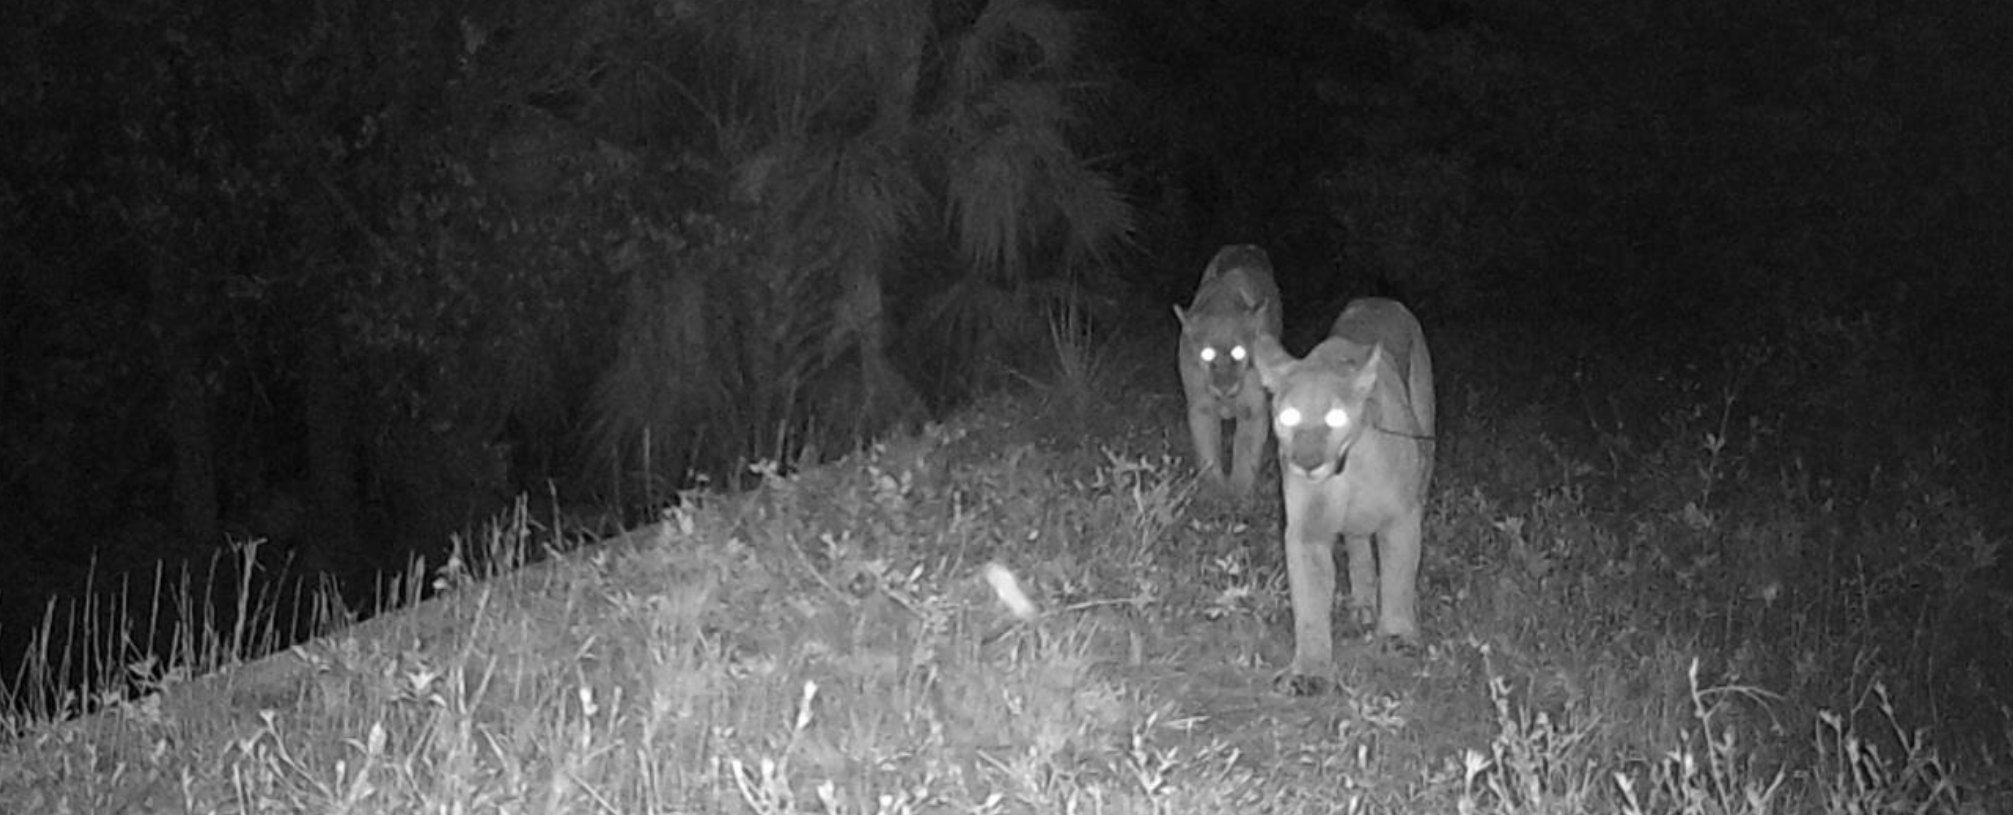 two Florida Panthers caught on camera in night vision